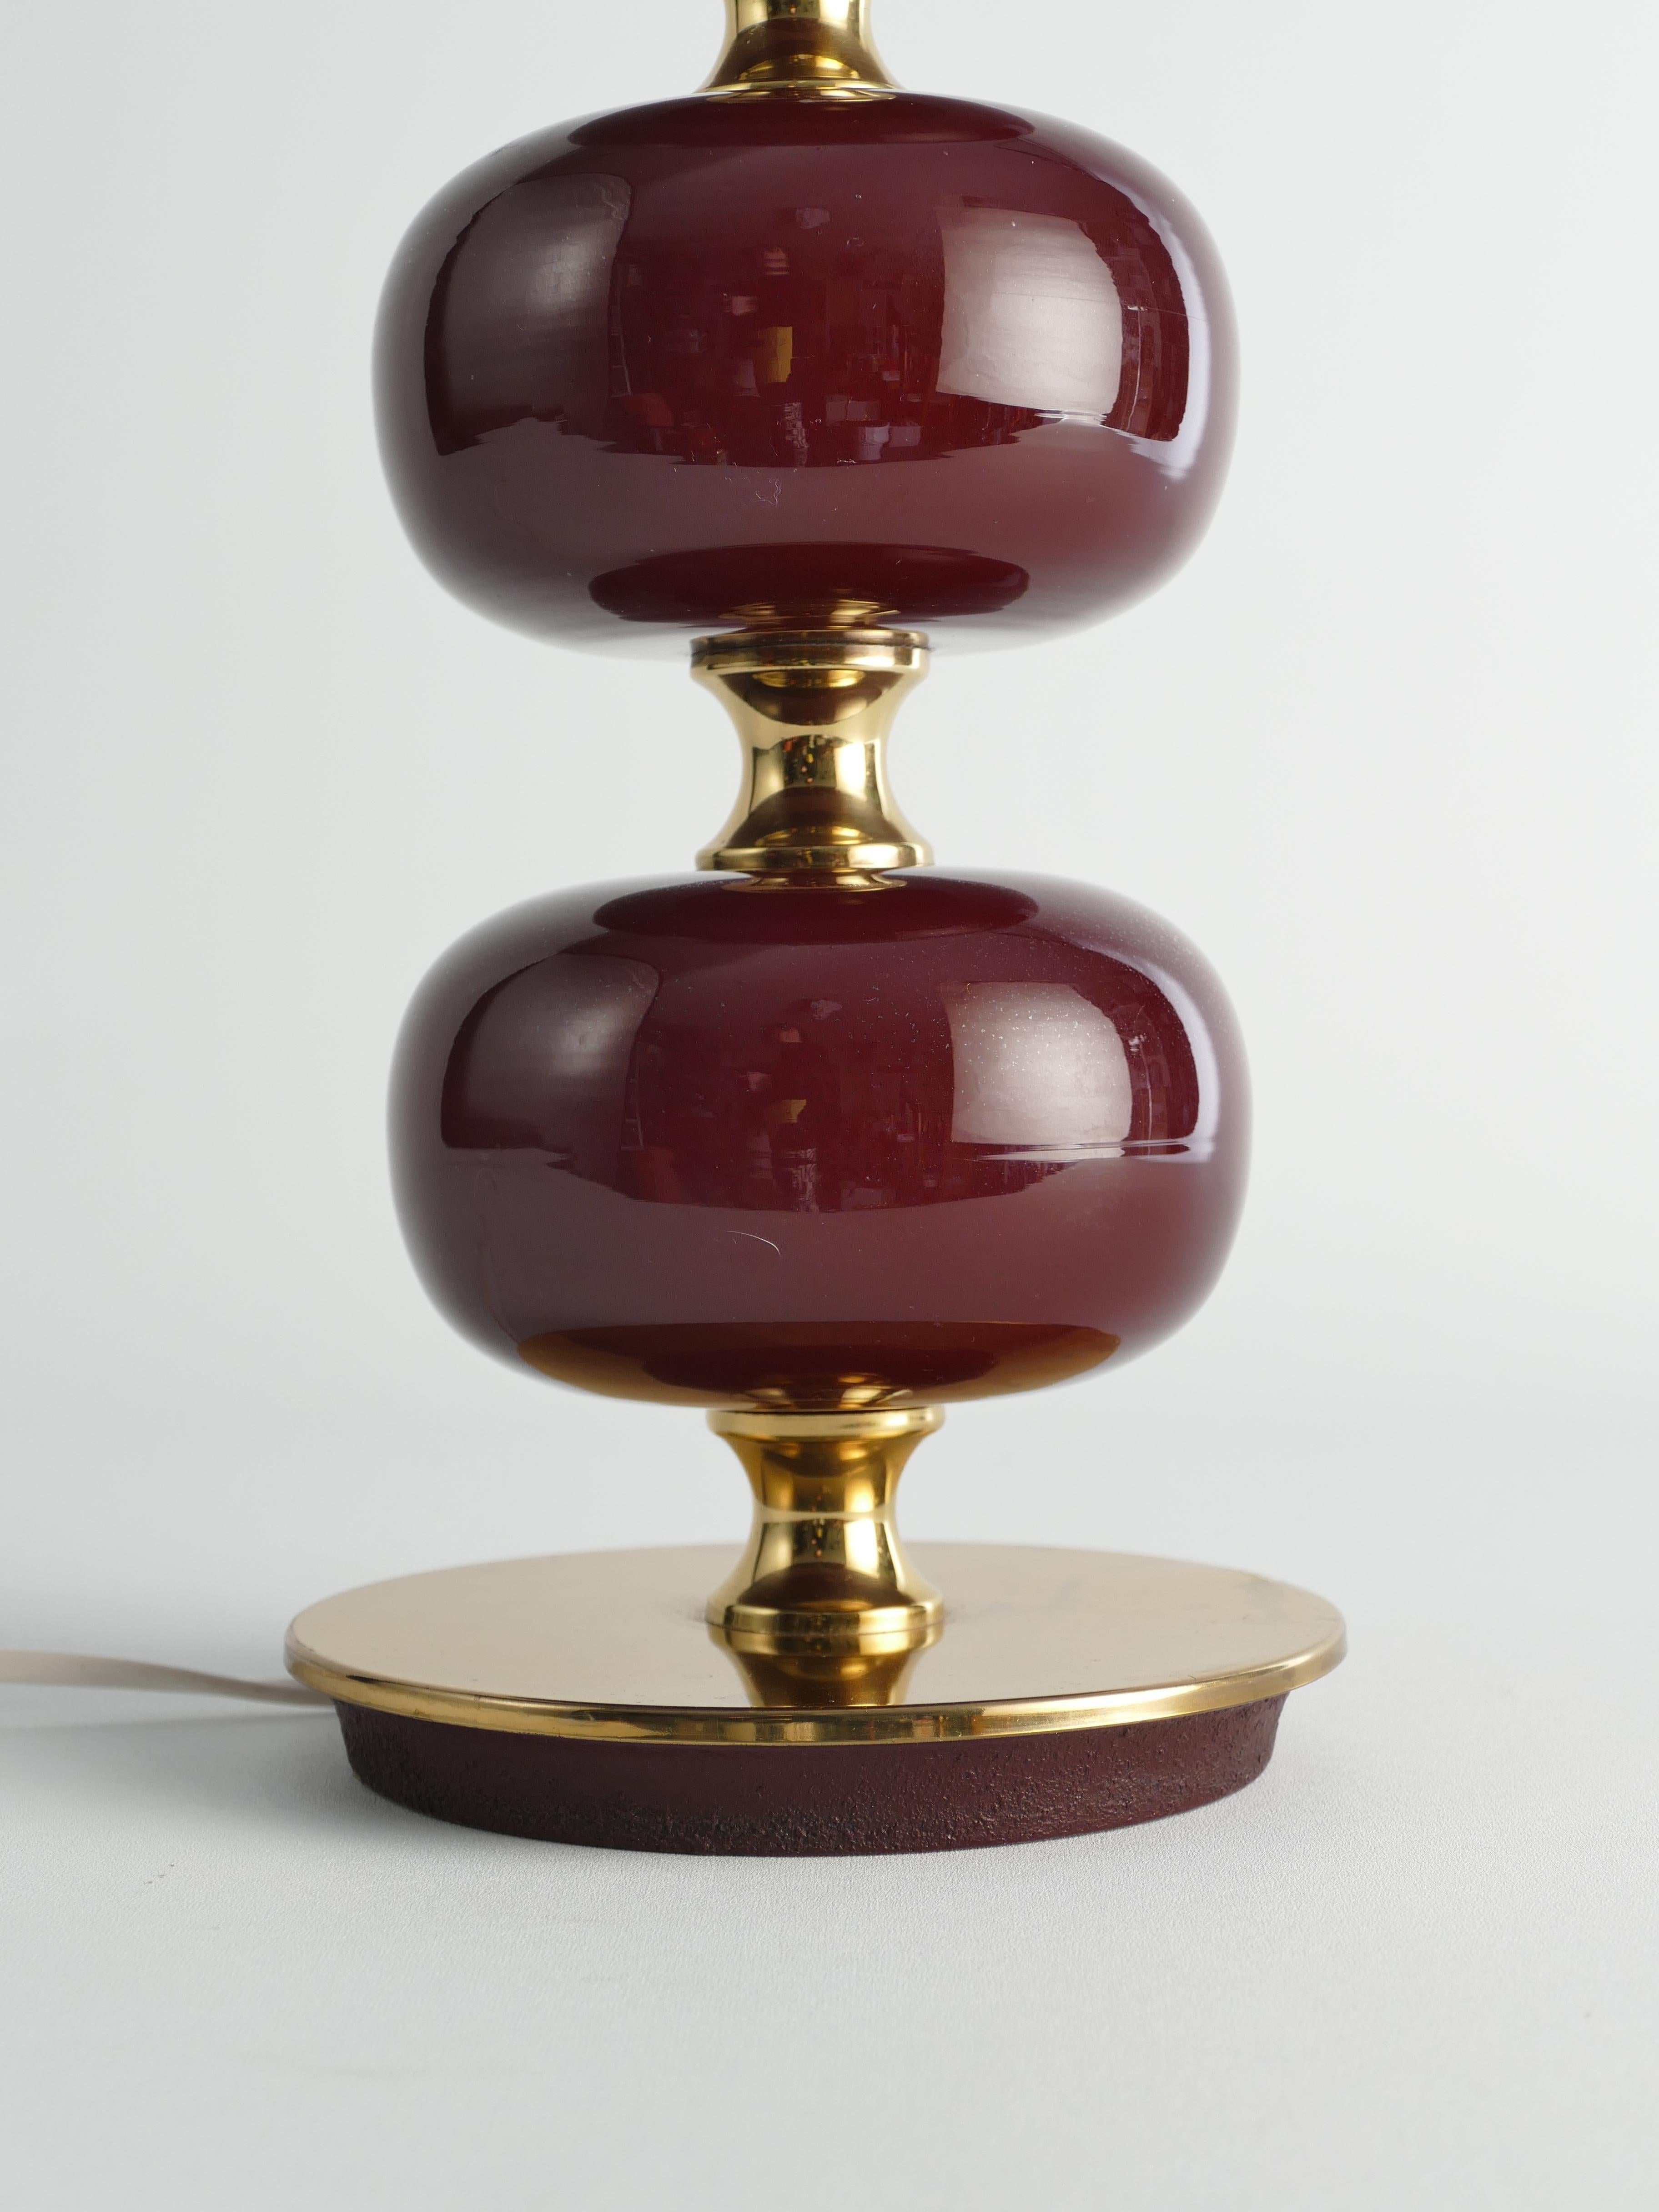 This midcentury table lamp, manufactured by Stilarmatur Tranås in Sweden between the 1960s and 1970s, features three bordeaux red glass spheres with brass feet and details.

Designed by Henrik Blomqvist for Tranås Stilarmatur, this large-sized model